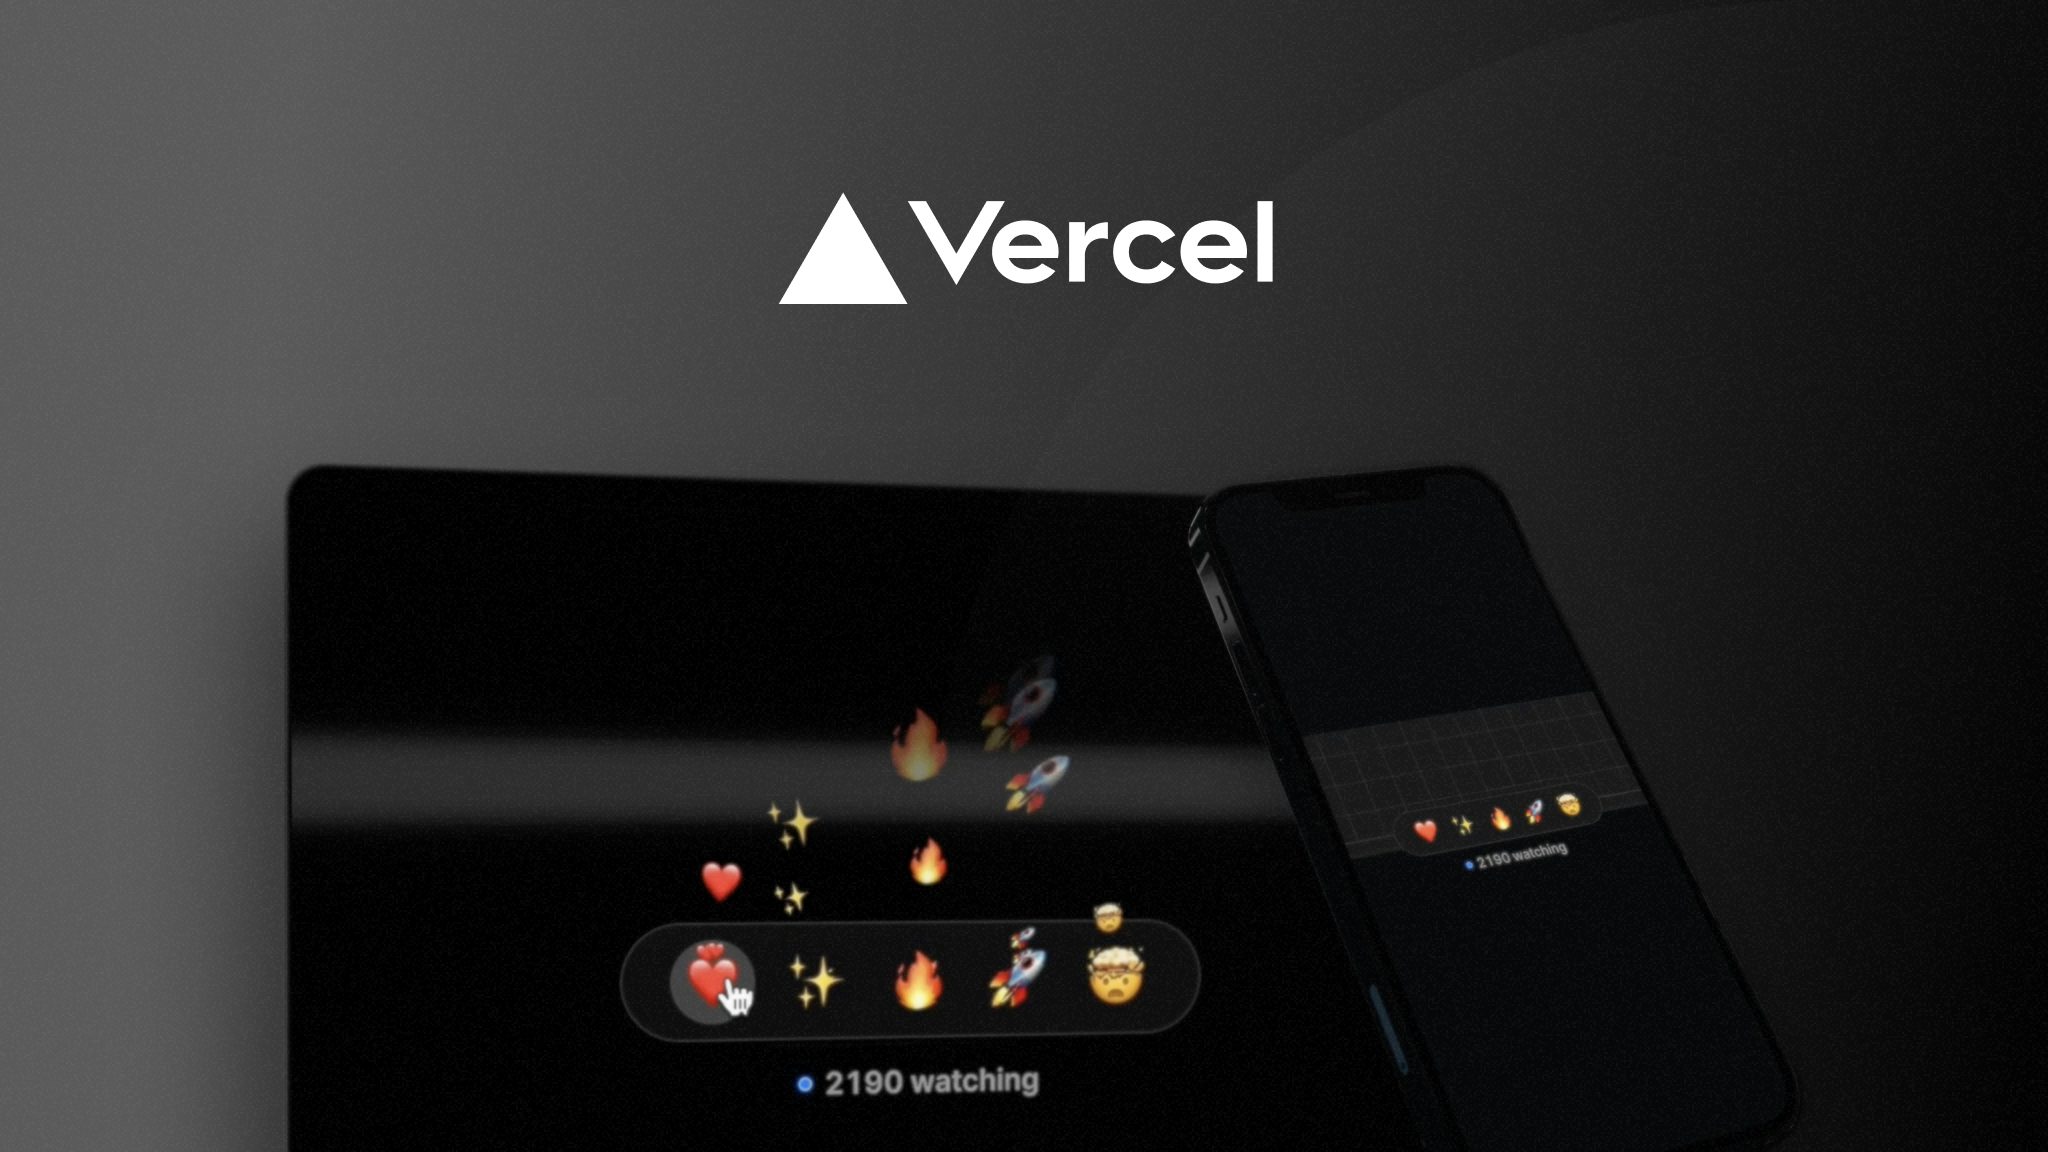 How Vercel used live reactions to improve engagement on their Vercel Ship livestream